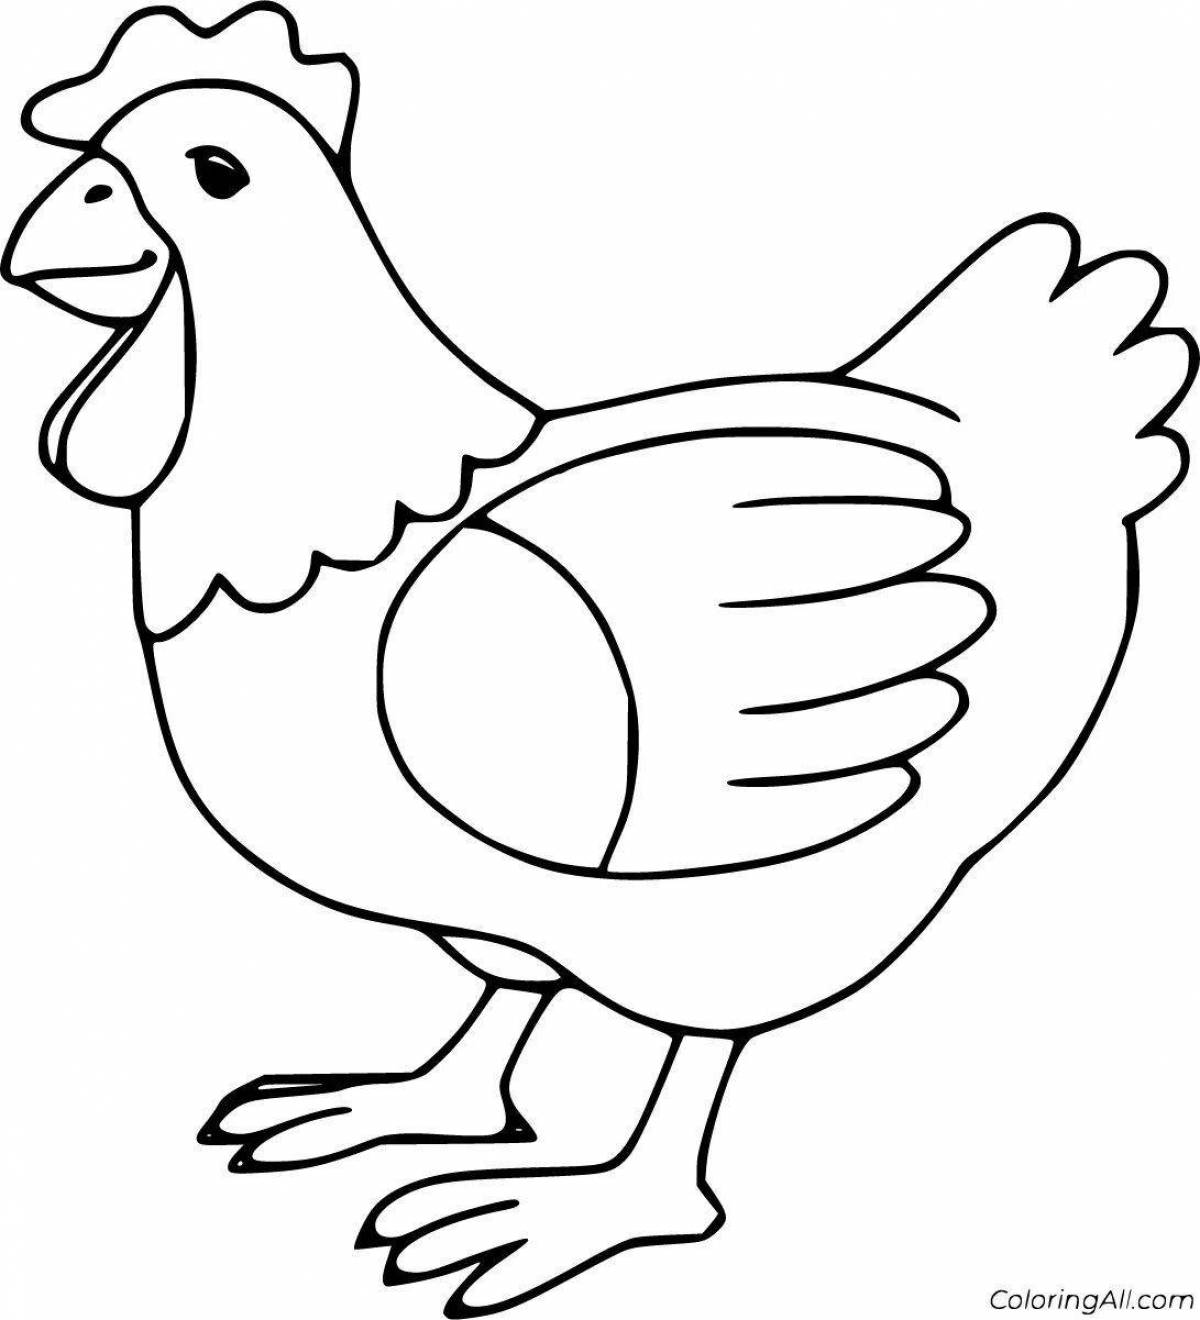 Adorable chick coloring book for kids 2-3 years old